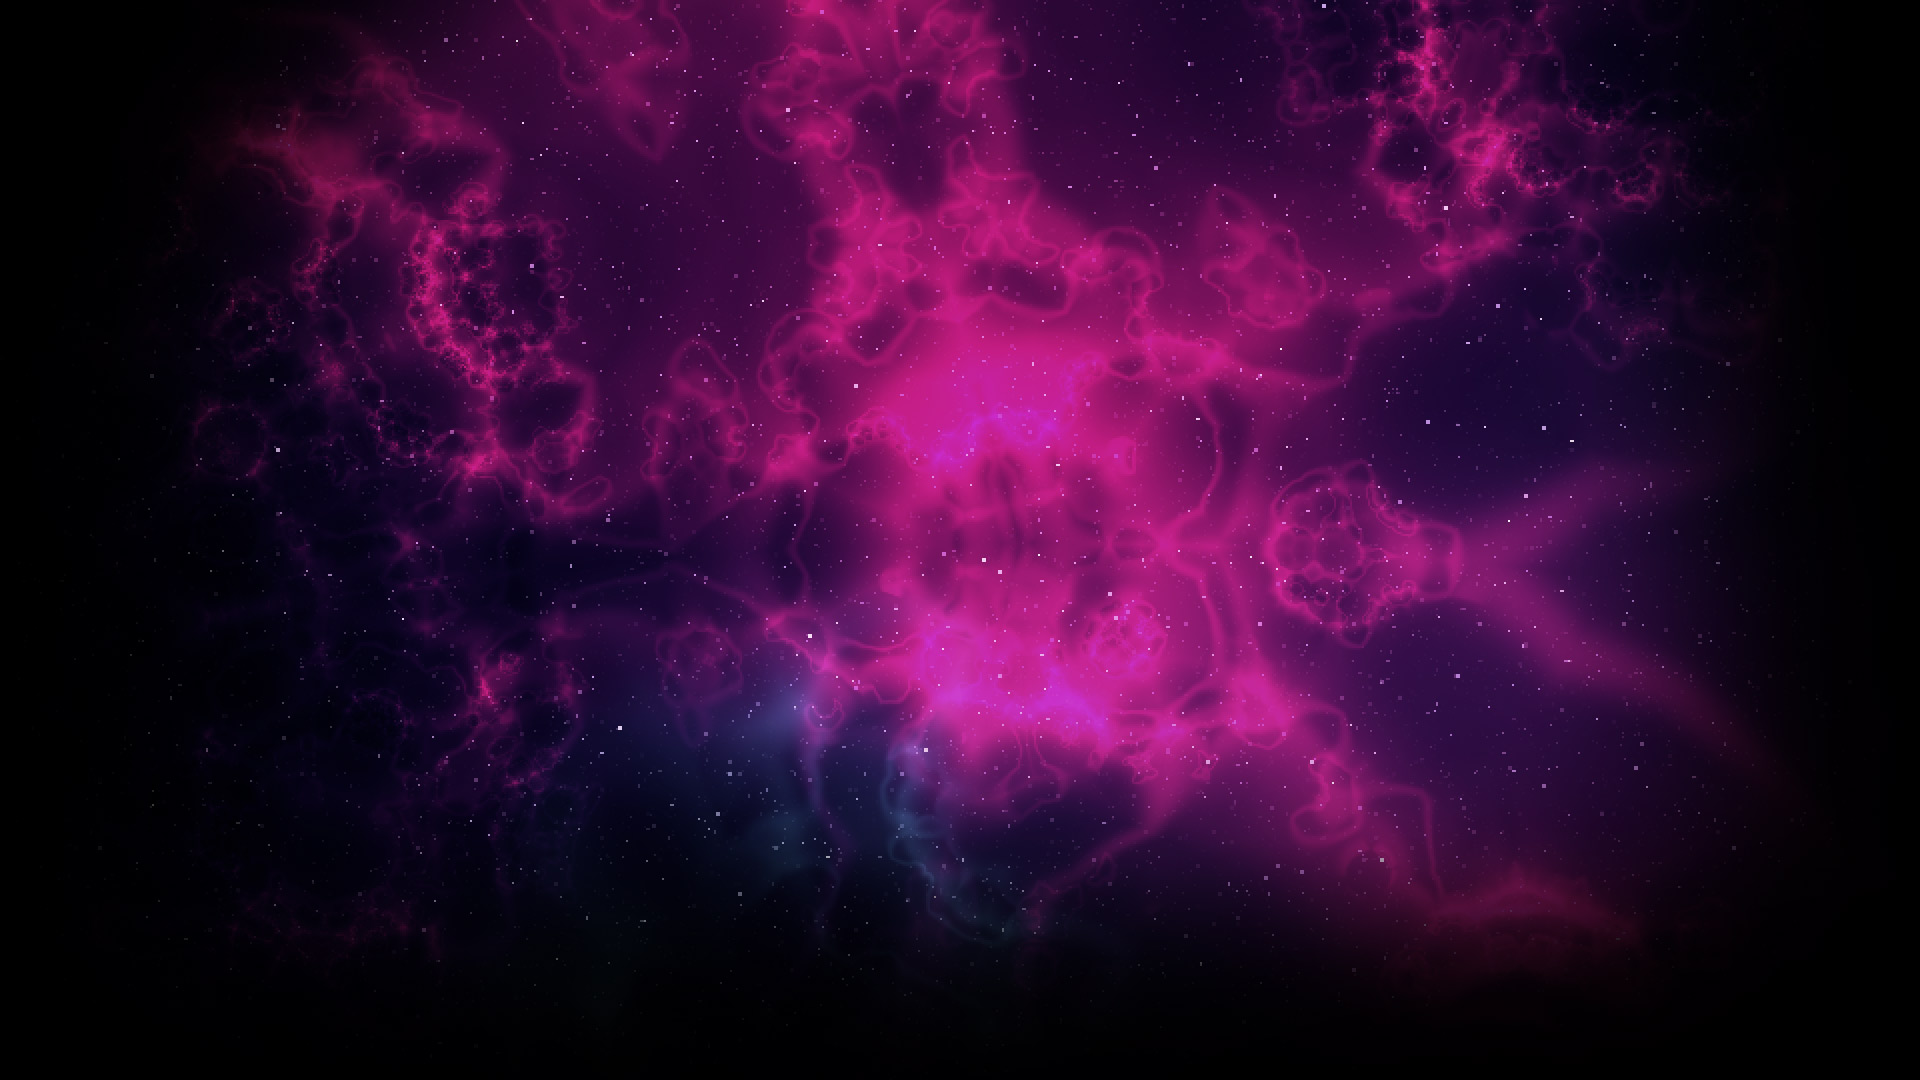 Steam Community :: Guide :: Purple Steam Backgrounds